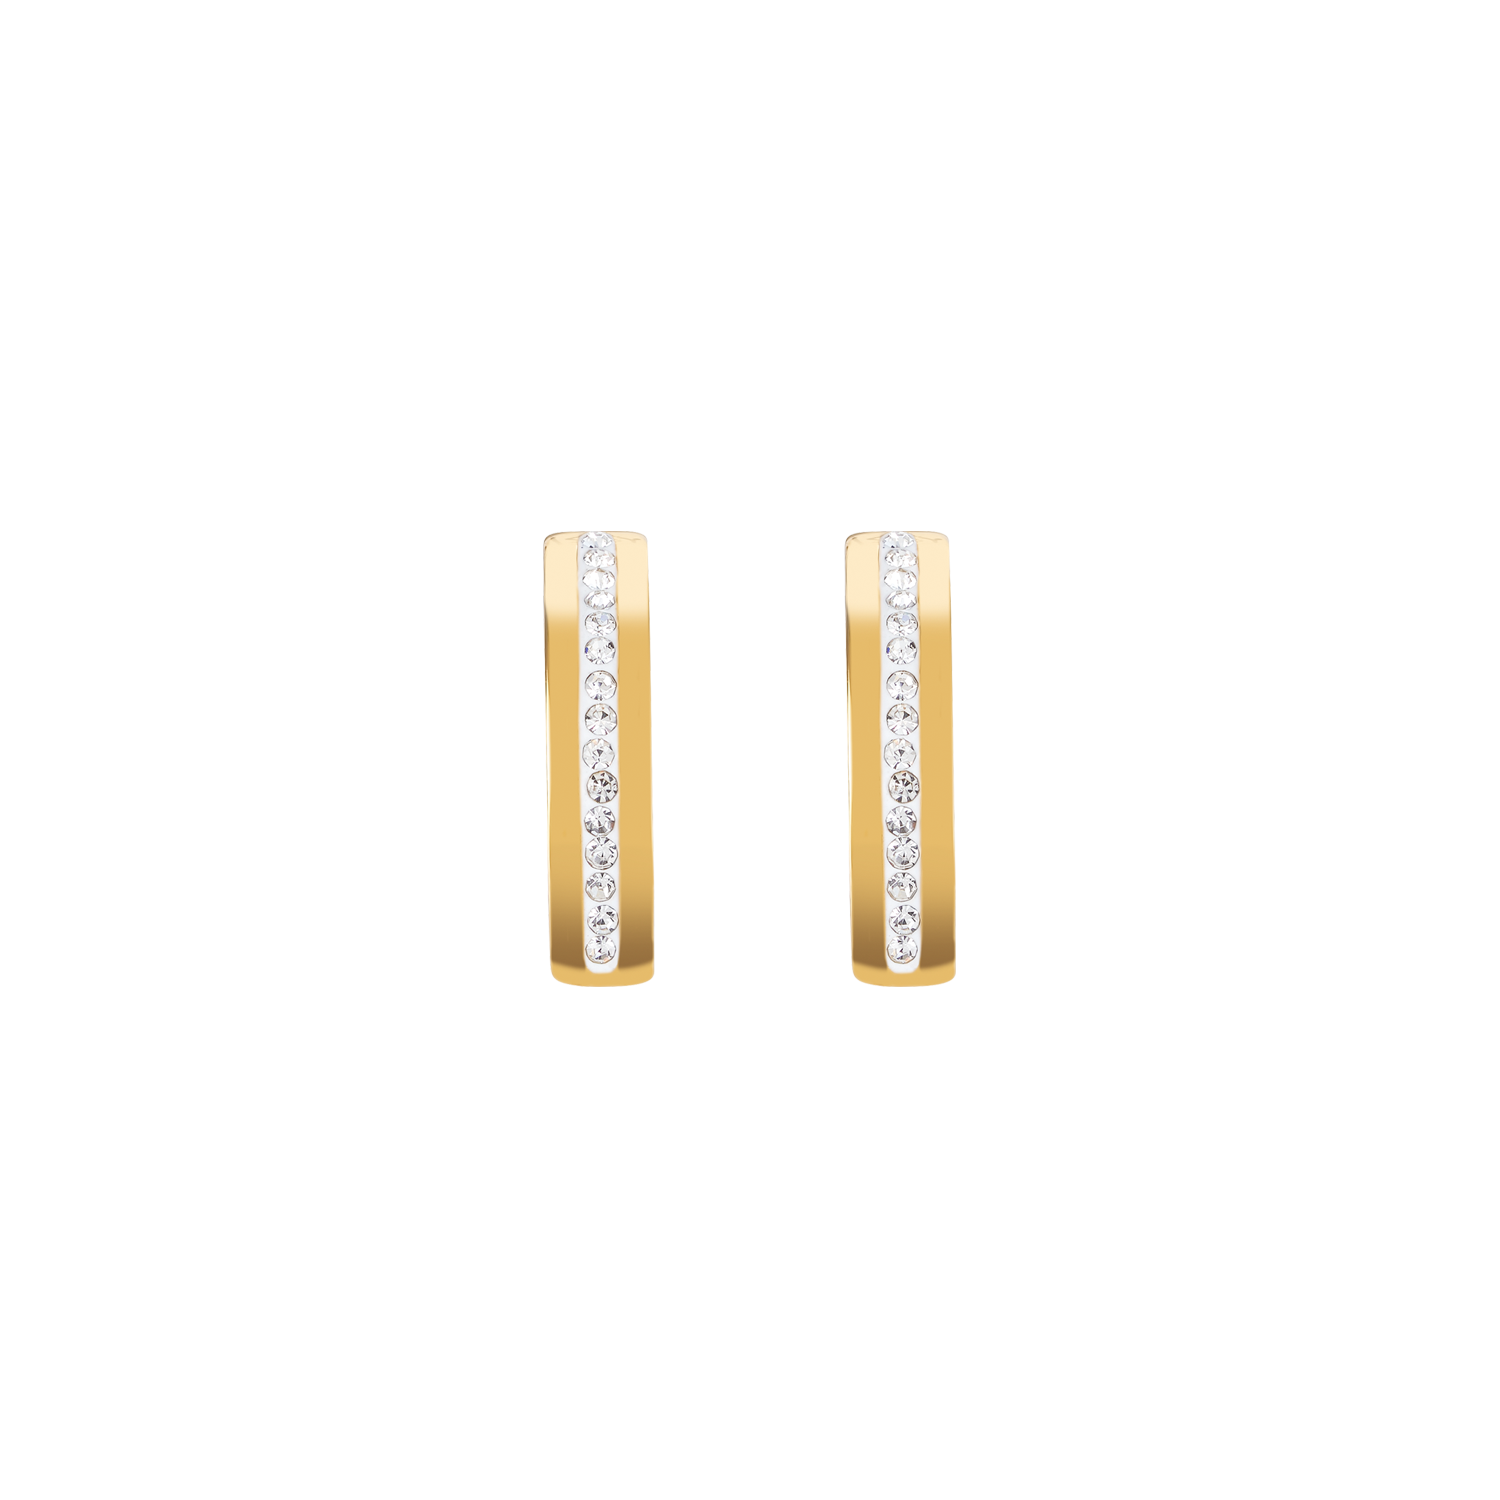 Earrings stainless steel gold & crystals pavé strip crystal